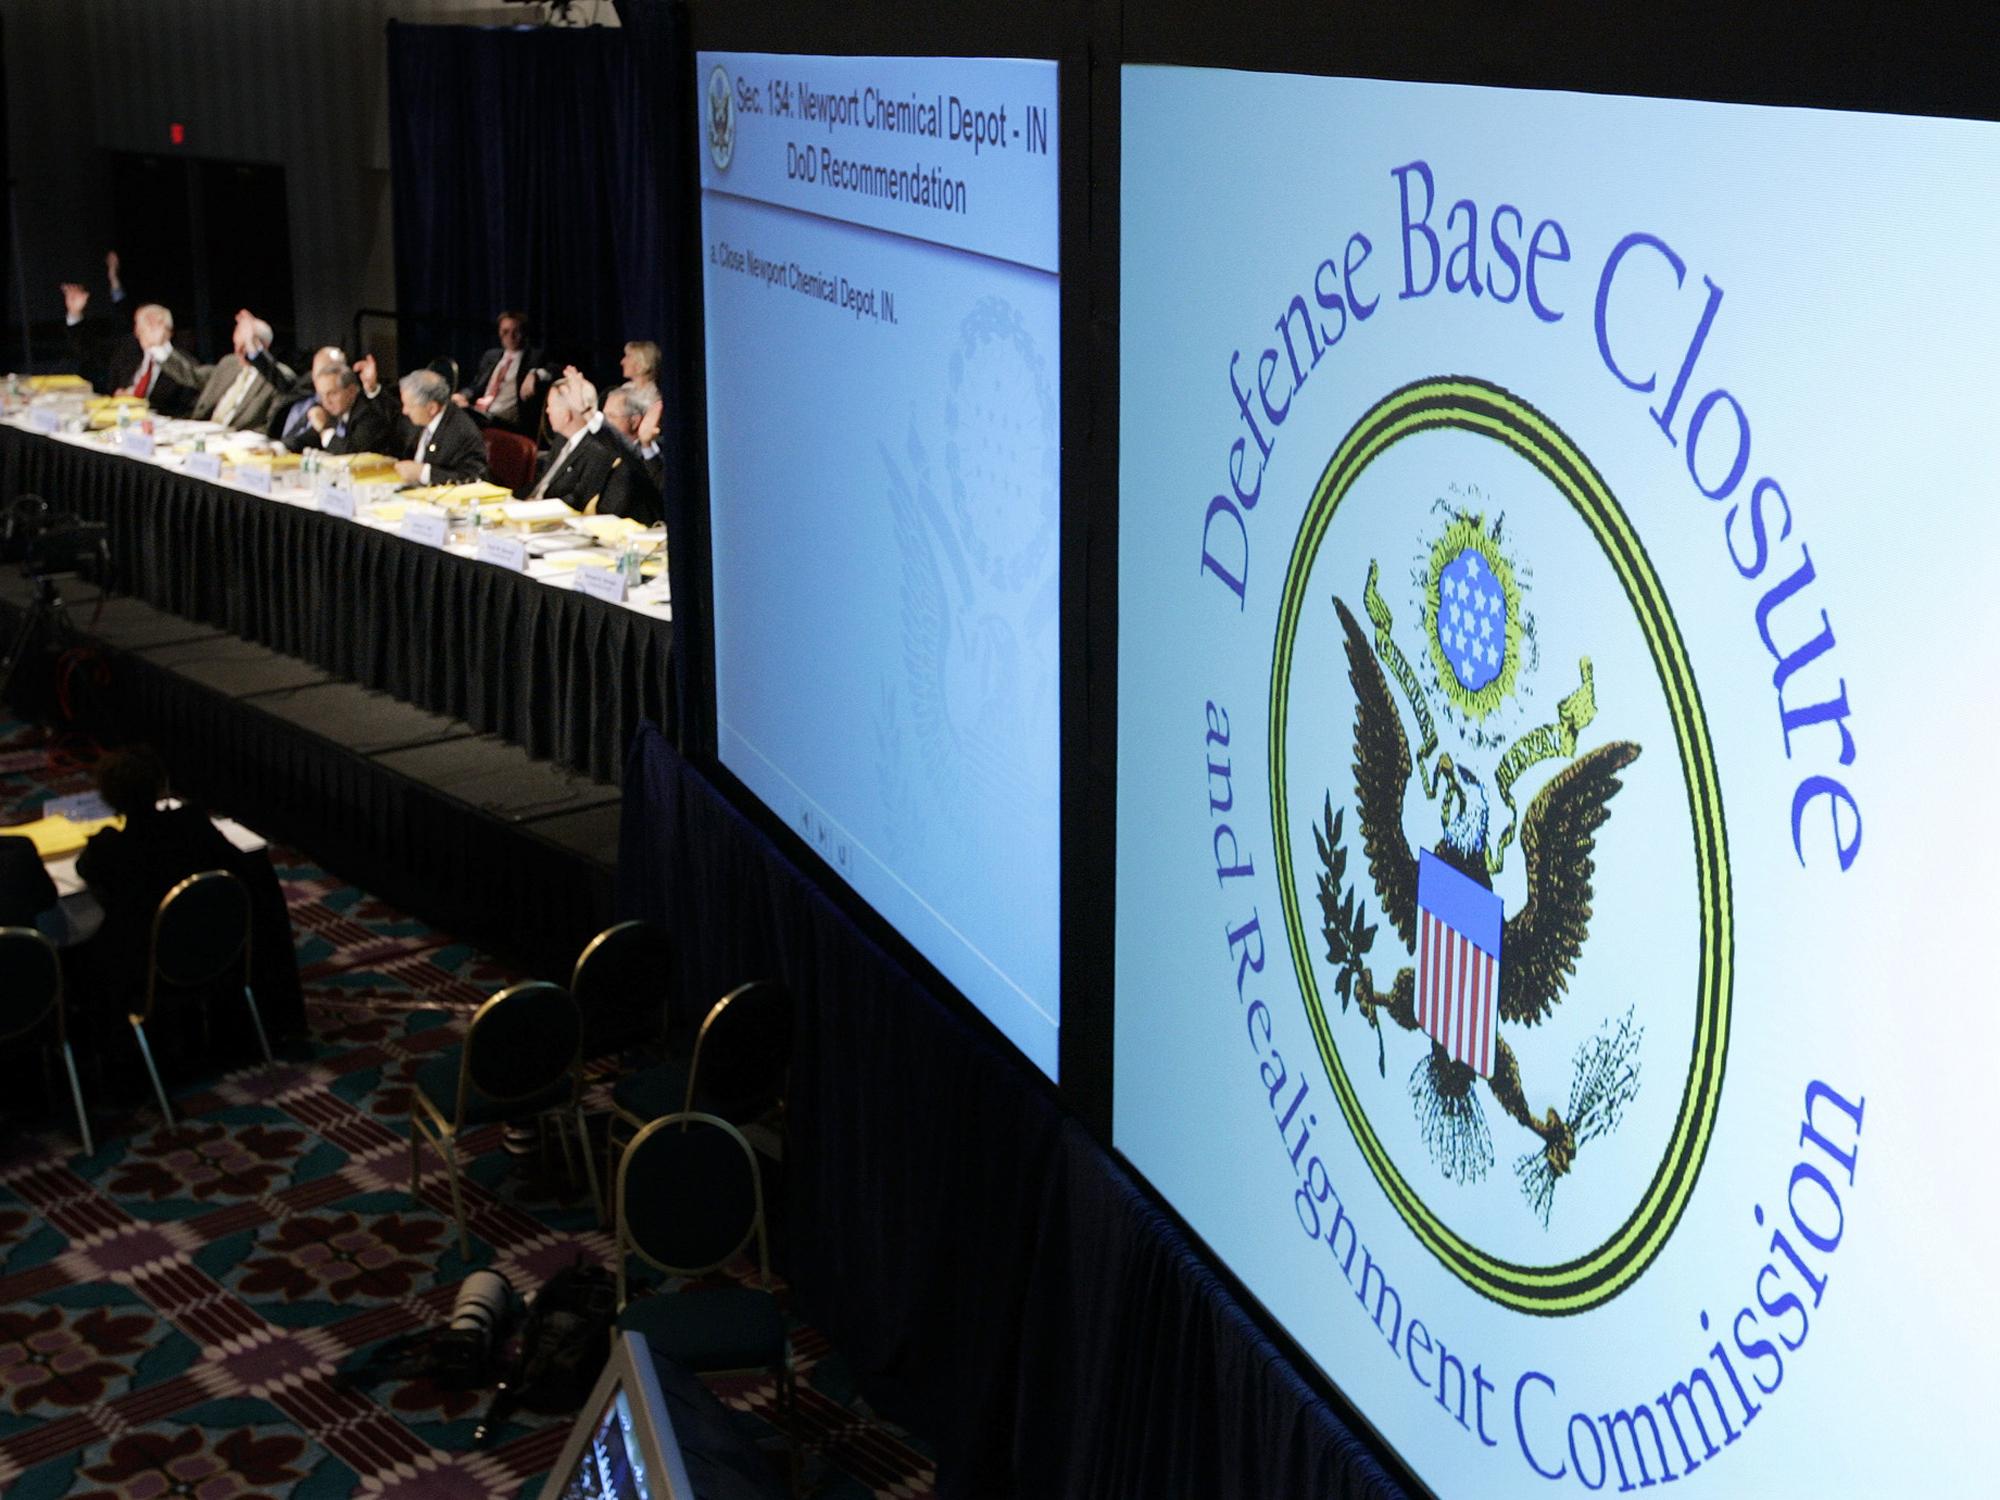 Defense Base Closure and Realignment Commission, casts vote during final deliberations, Arlington, Virginia, photo